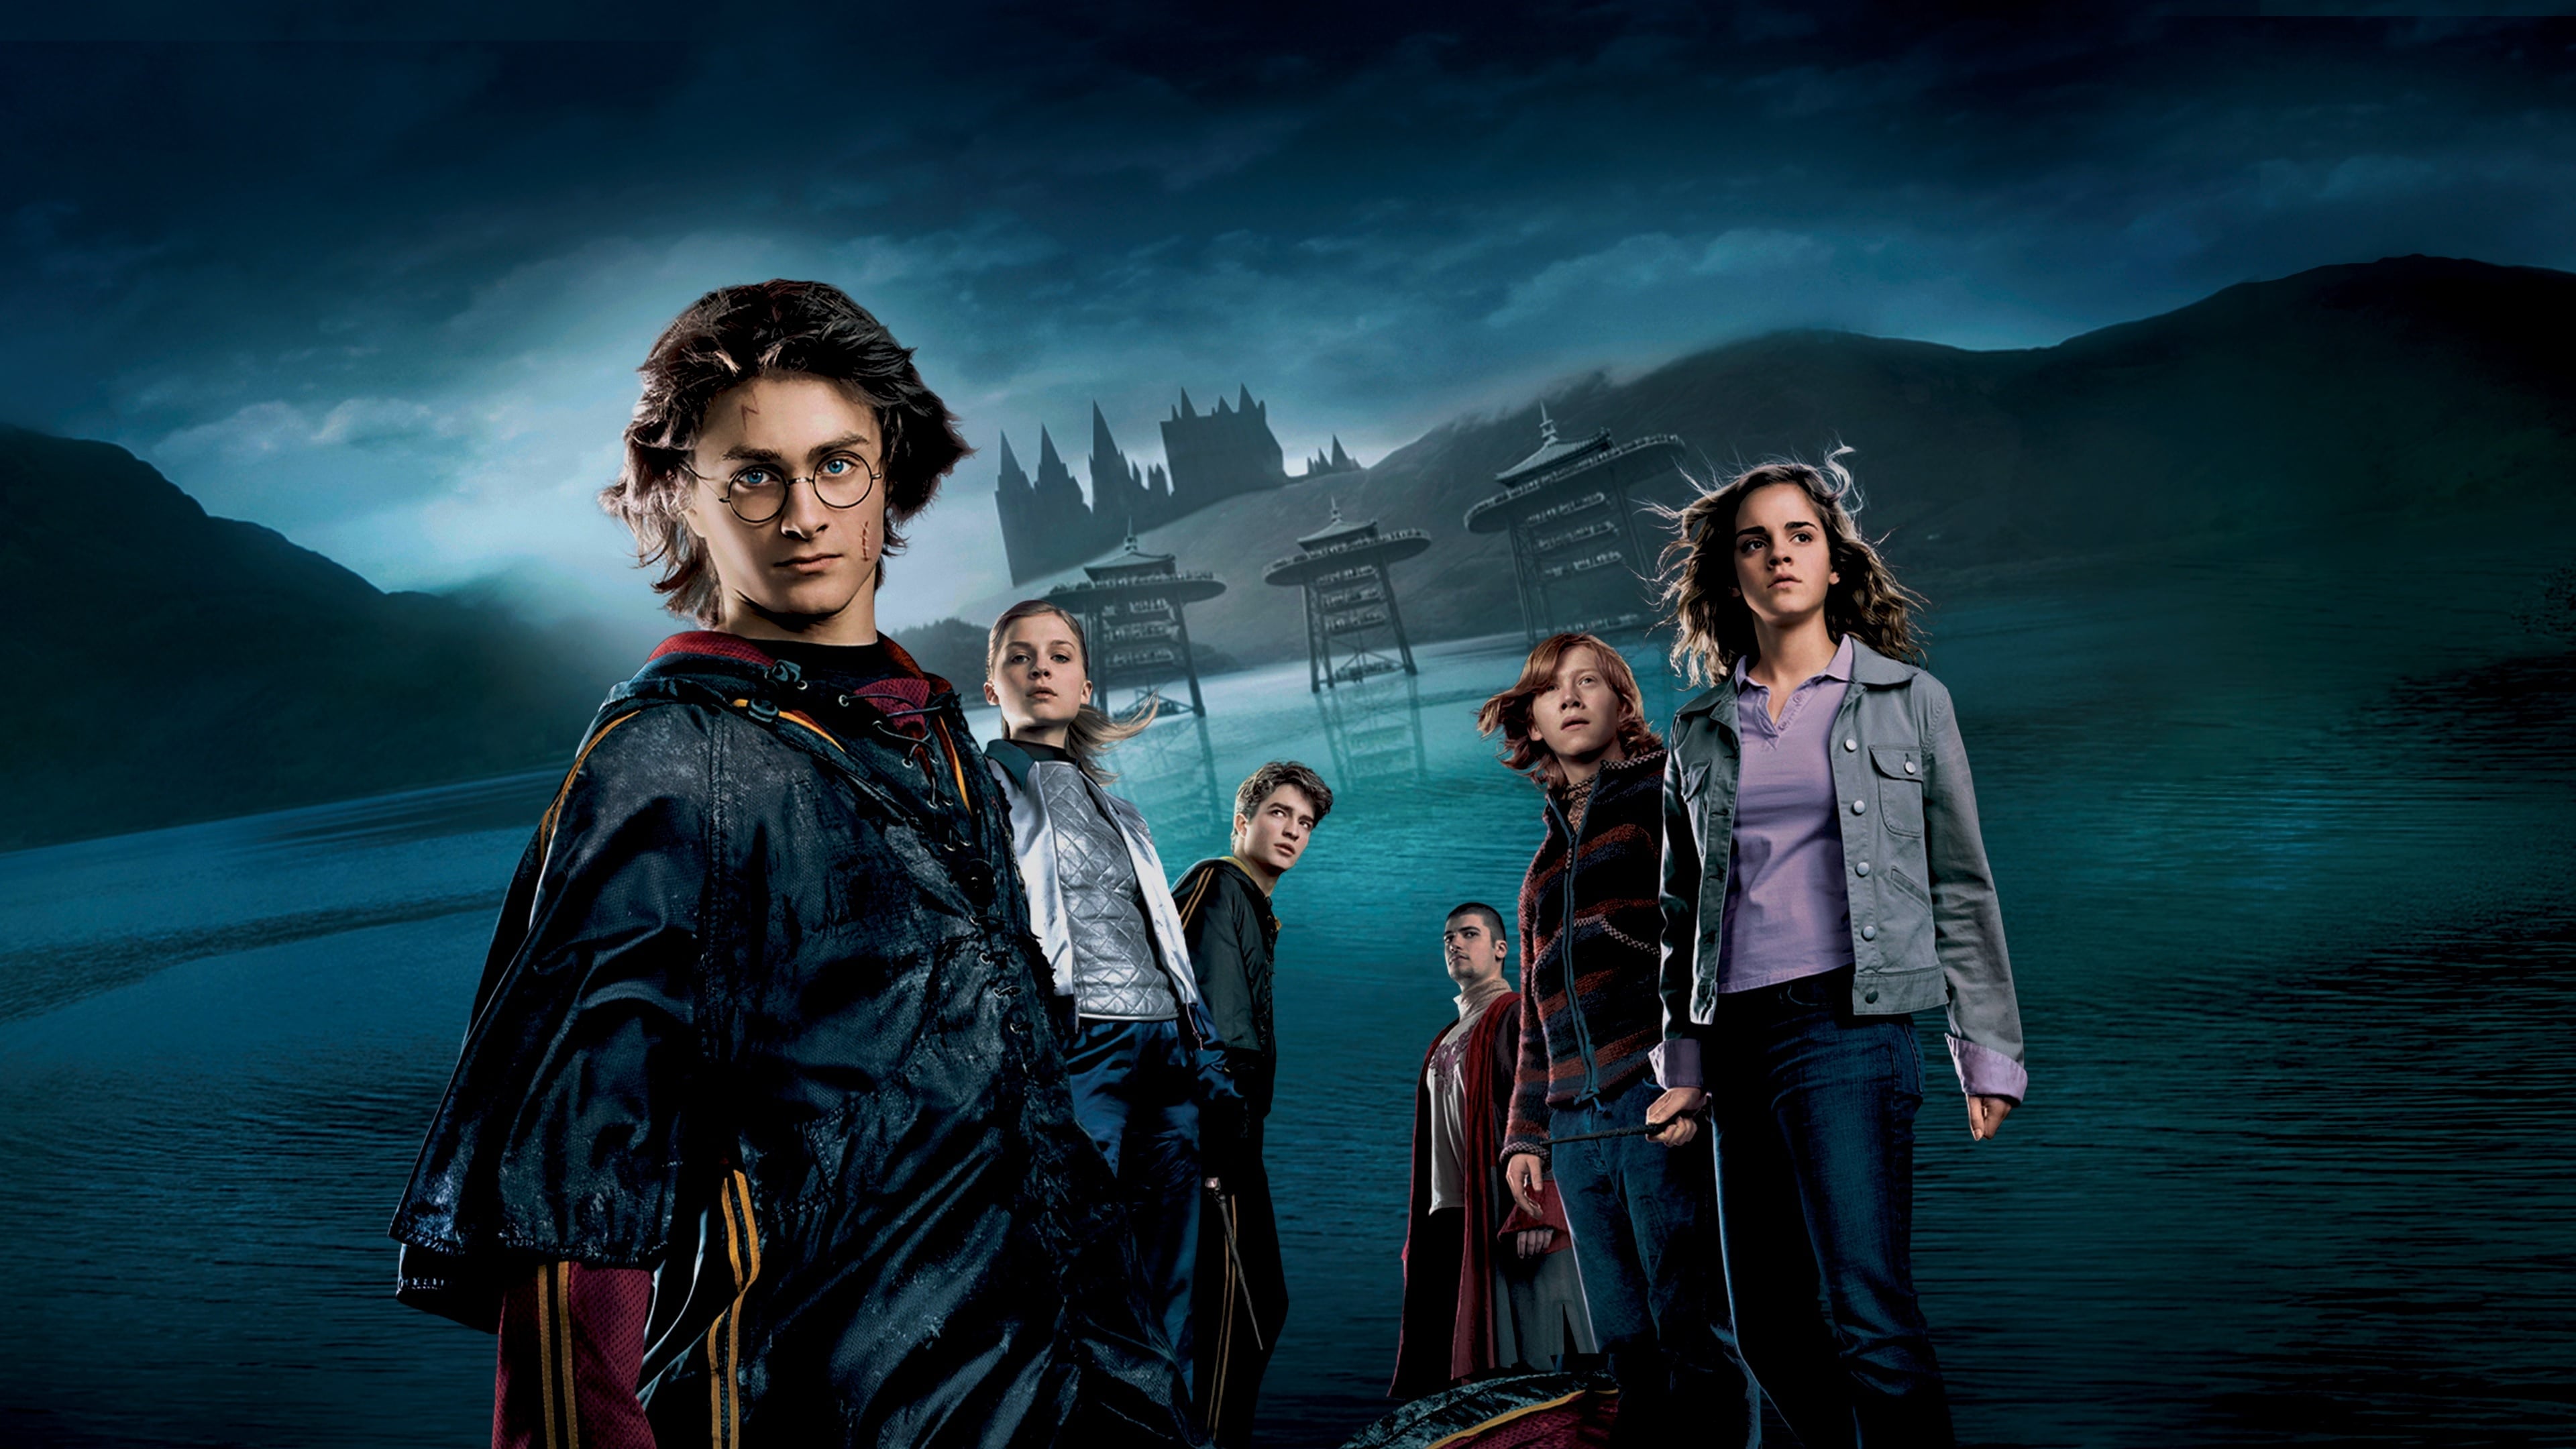 Harry Potter and the Goblet of Fire 4k Ultra HD Wallpaper